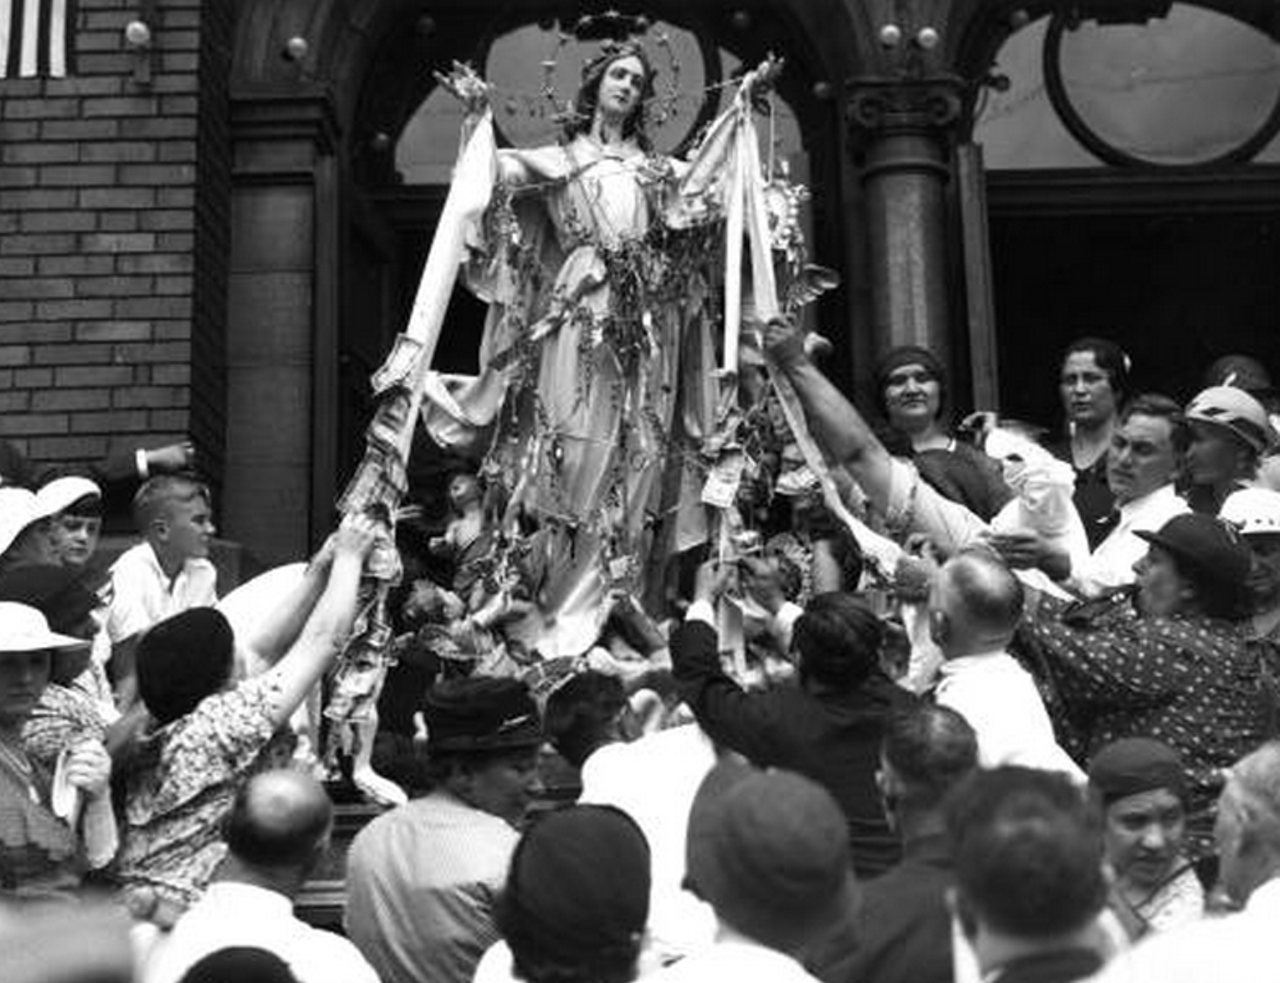 Locals provide offerings to the Virgin Mary during the Feast of Assumption, 1935.